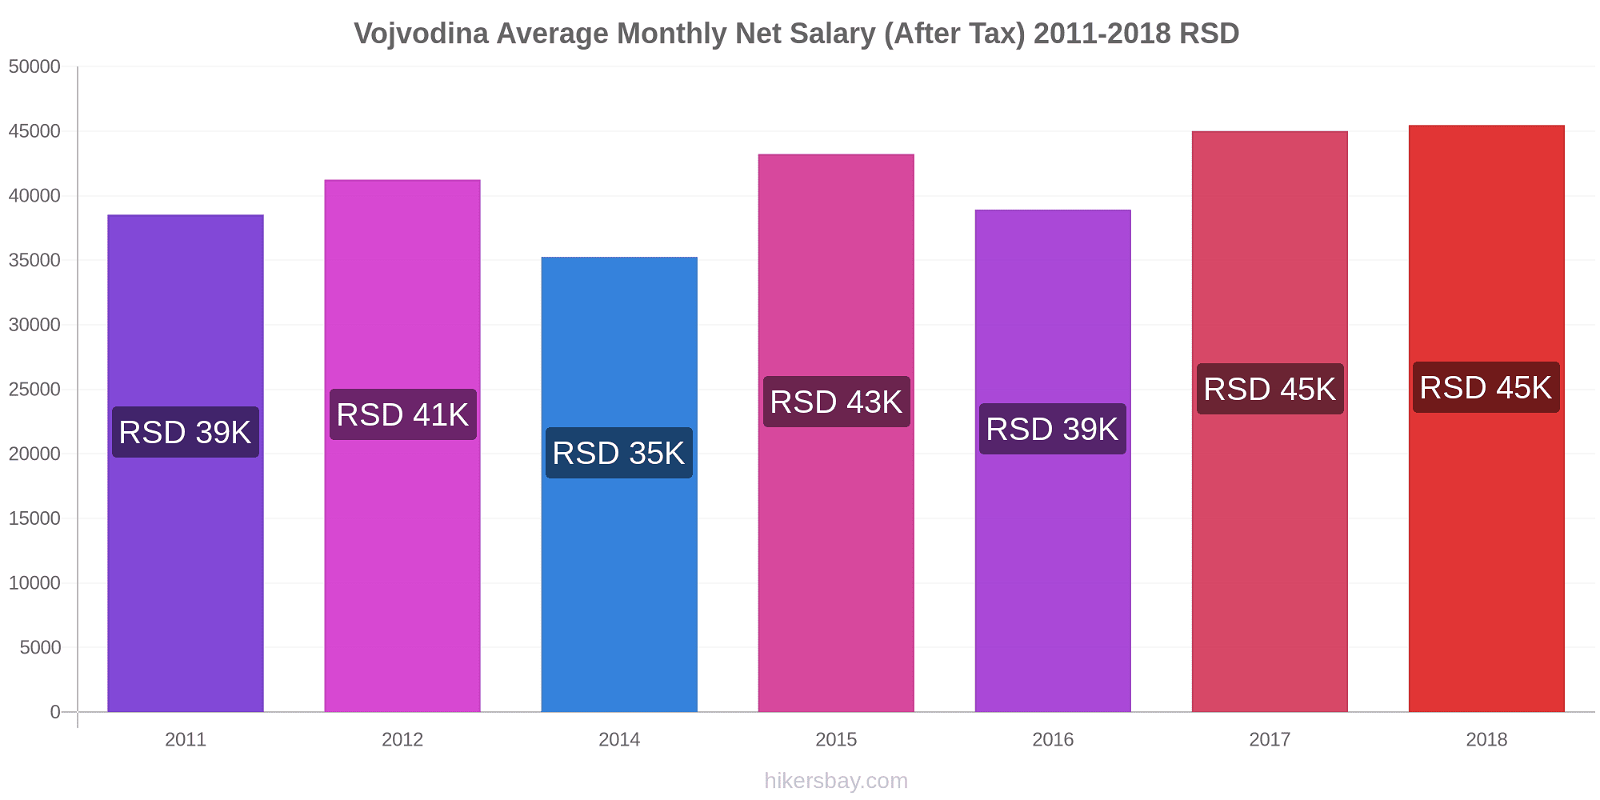 Vojvodina price changes Average Monthly Net Salary (After Tax) hikersbay.com